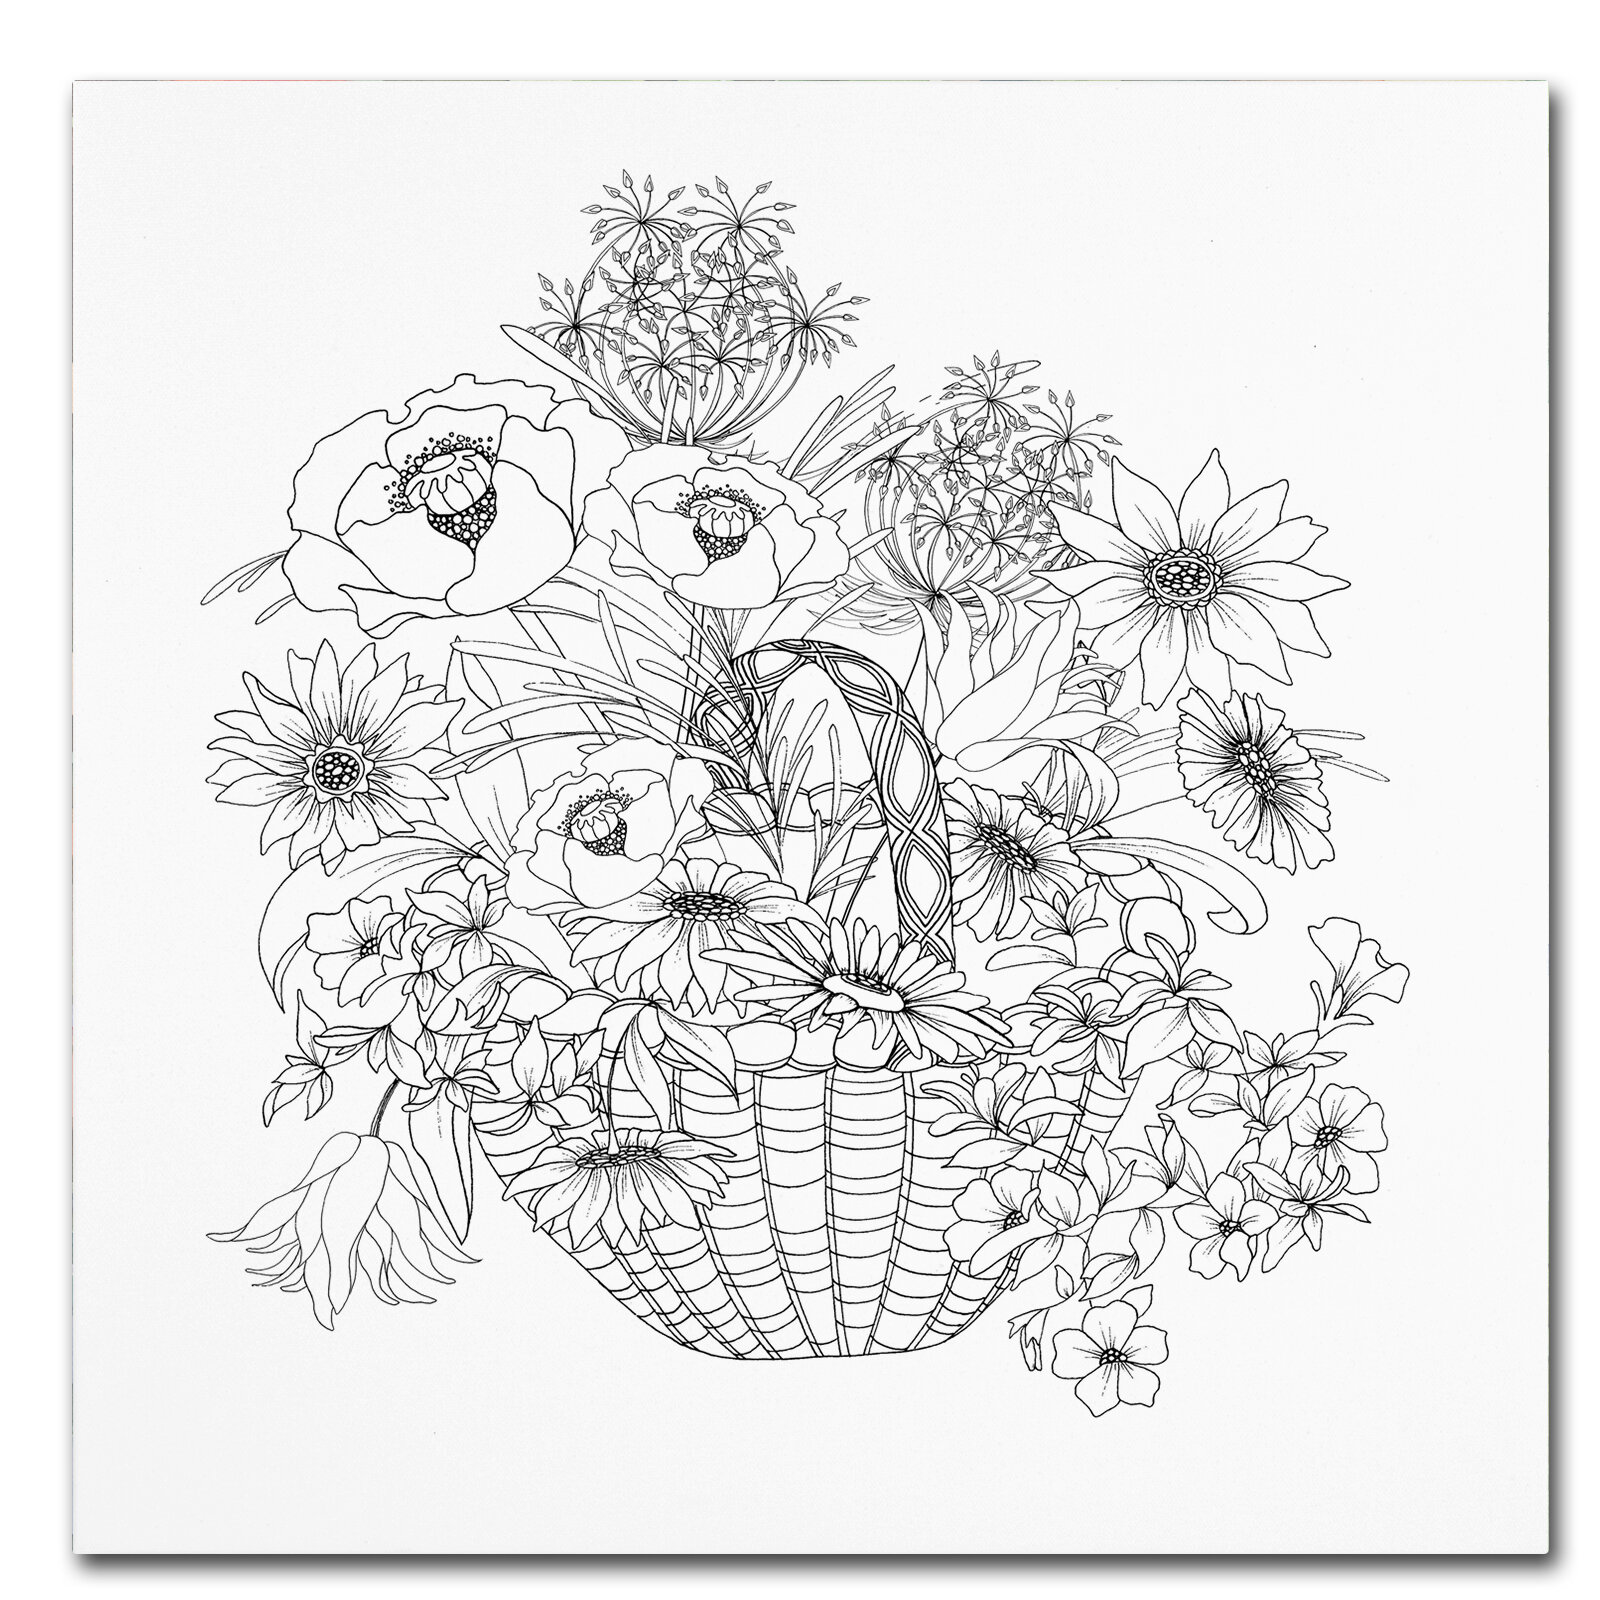 Trademark Art Flower Basket Drawing Print On Wrapped Canvas Wayfair Are you searching for flower basket png images or vector? flower basket drawing print on wrapped canvas